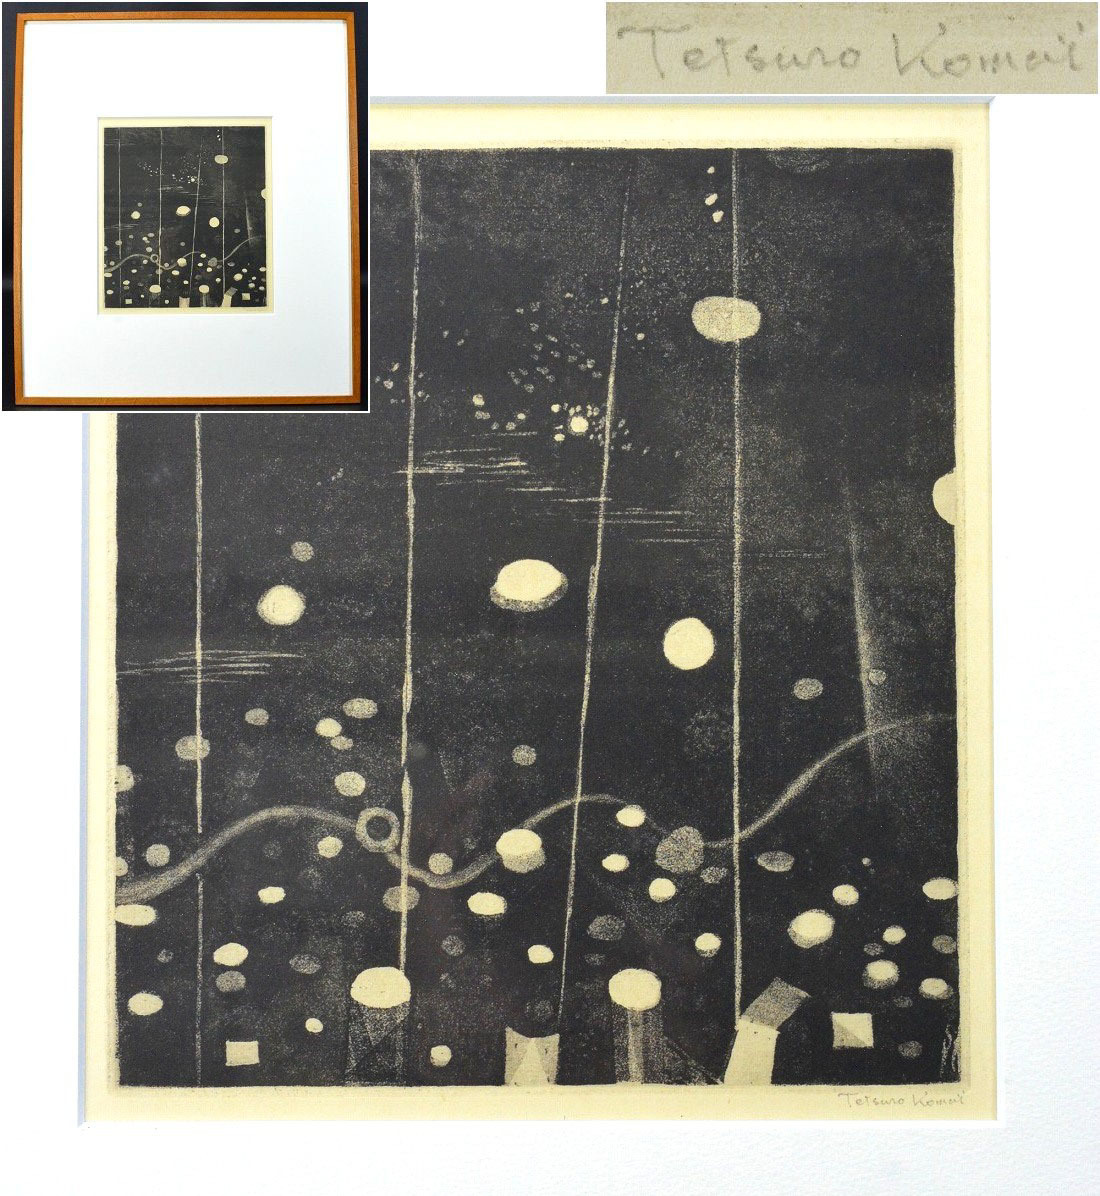 Pioneer of modern copperplate prints [Tetsuro Komai] Copperplate print ``Piquet's Afterimage'' Framed Signed Painting, artwork, print, copperplate print, etching